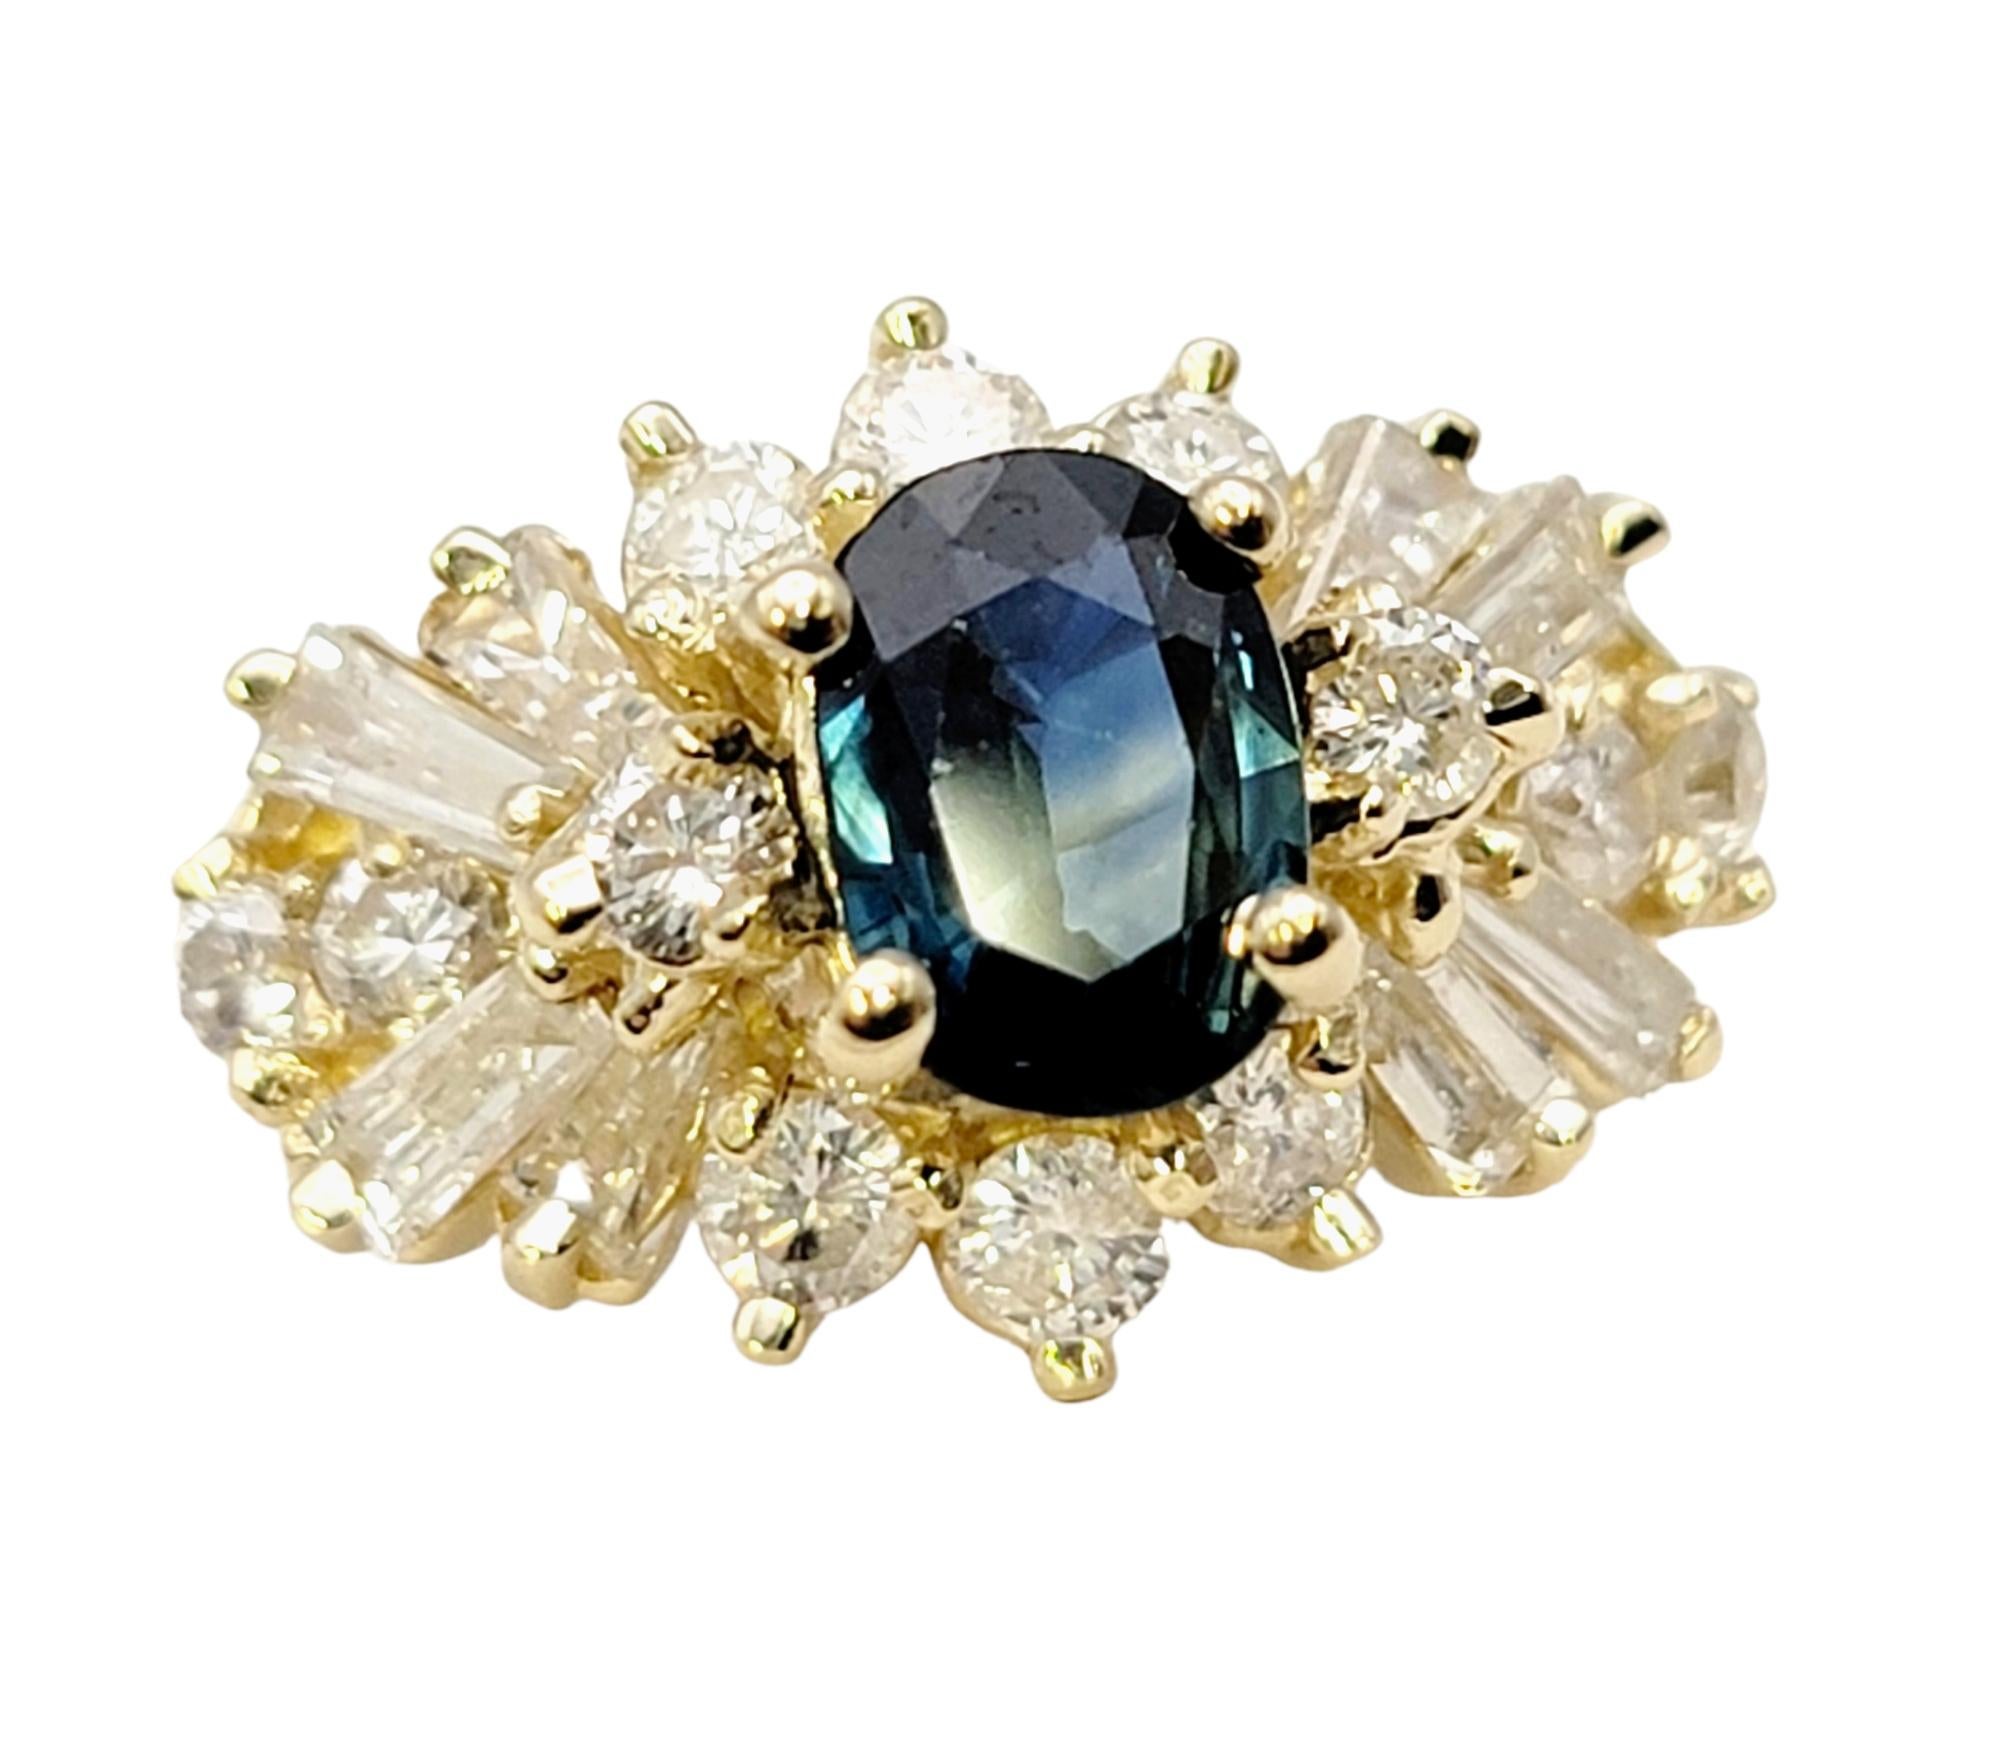 Ring size: 6.5

This stunningly sparkly diamond and sapphire ring will shine beautifully on your hand. The deep blue oval shaped sapphire stone flatters the finger while the surrounding natural diamonds pop elegantly against the warm yellow gold